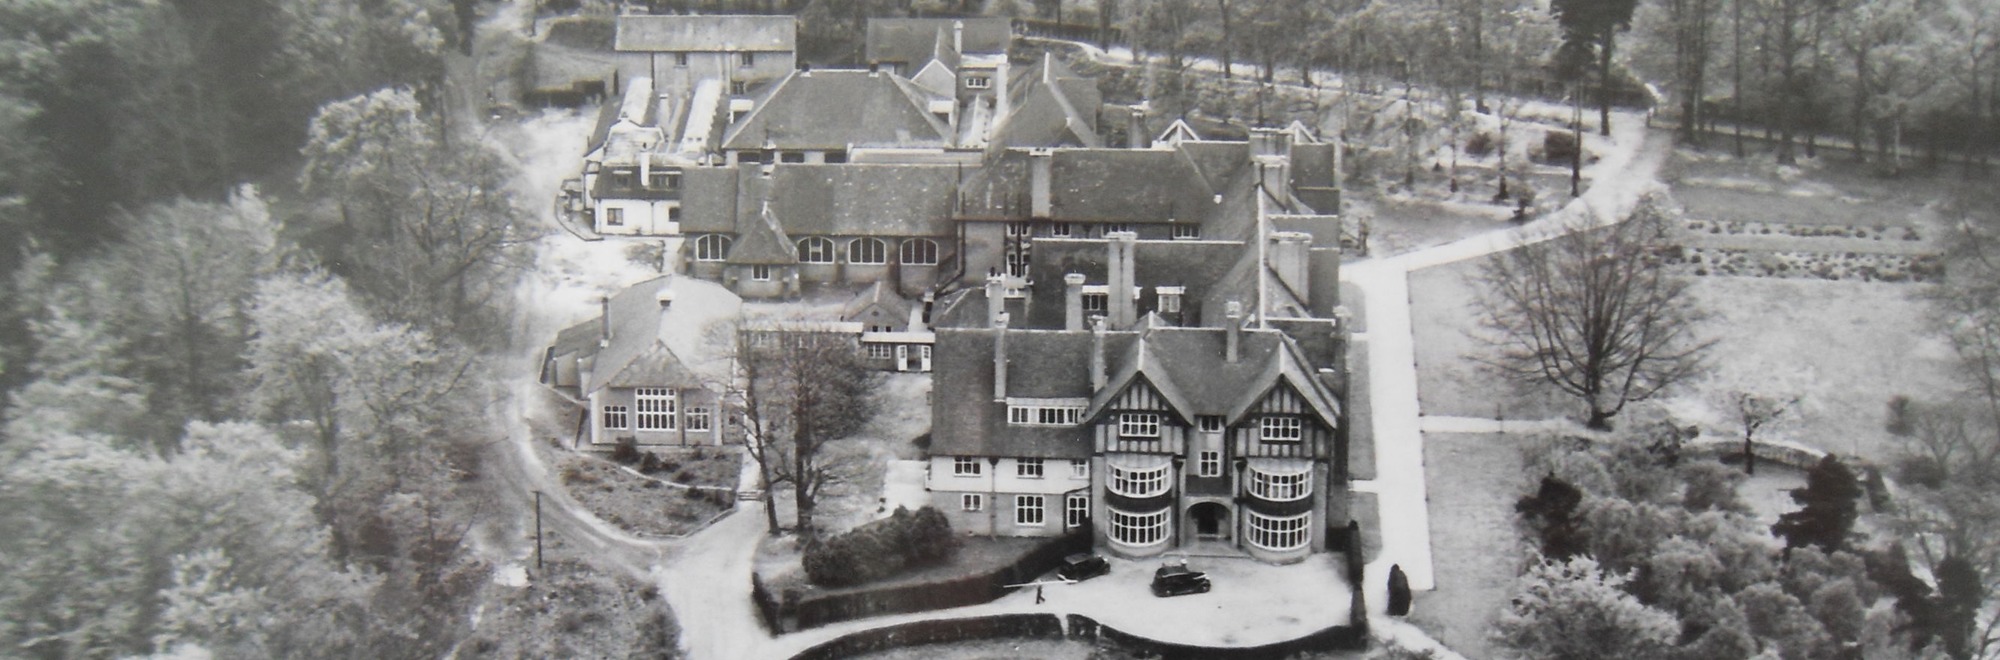 Reed's School aerial photo late 1940s